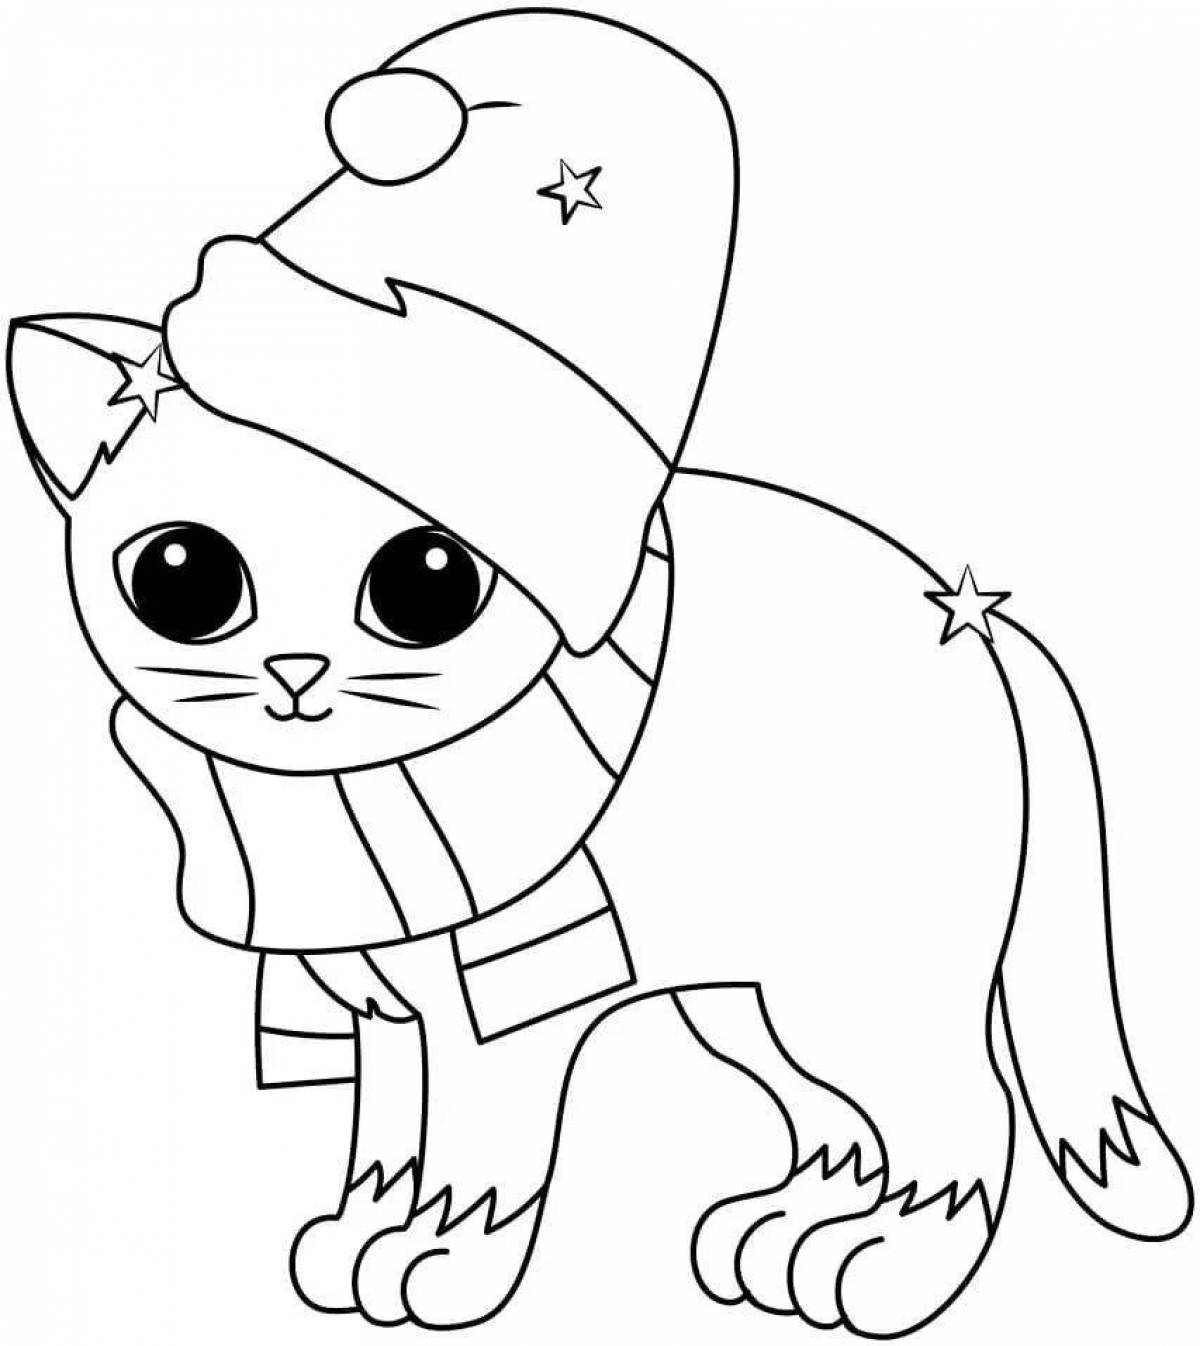 Chi adorable kitten coloring page